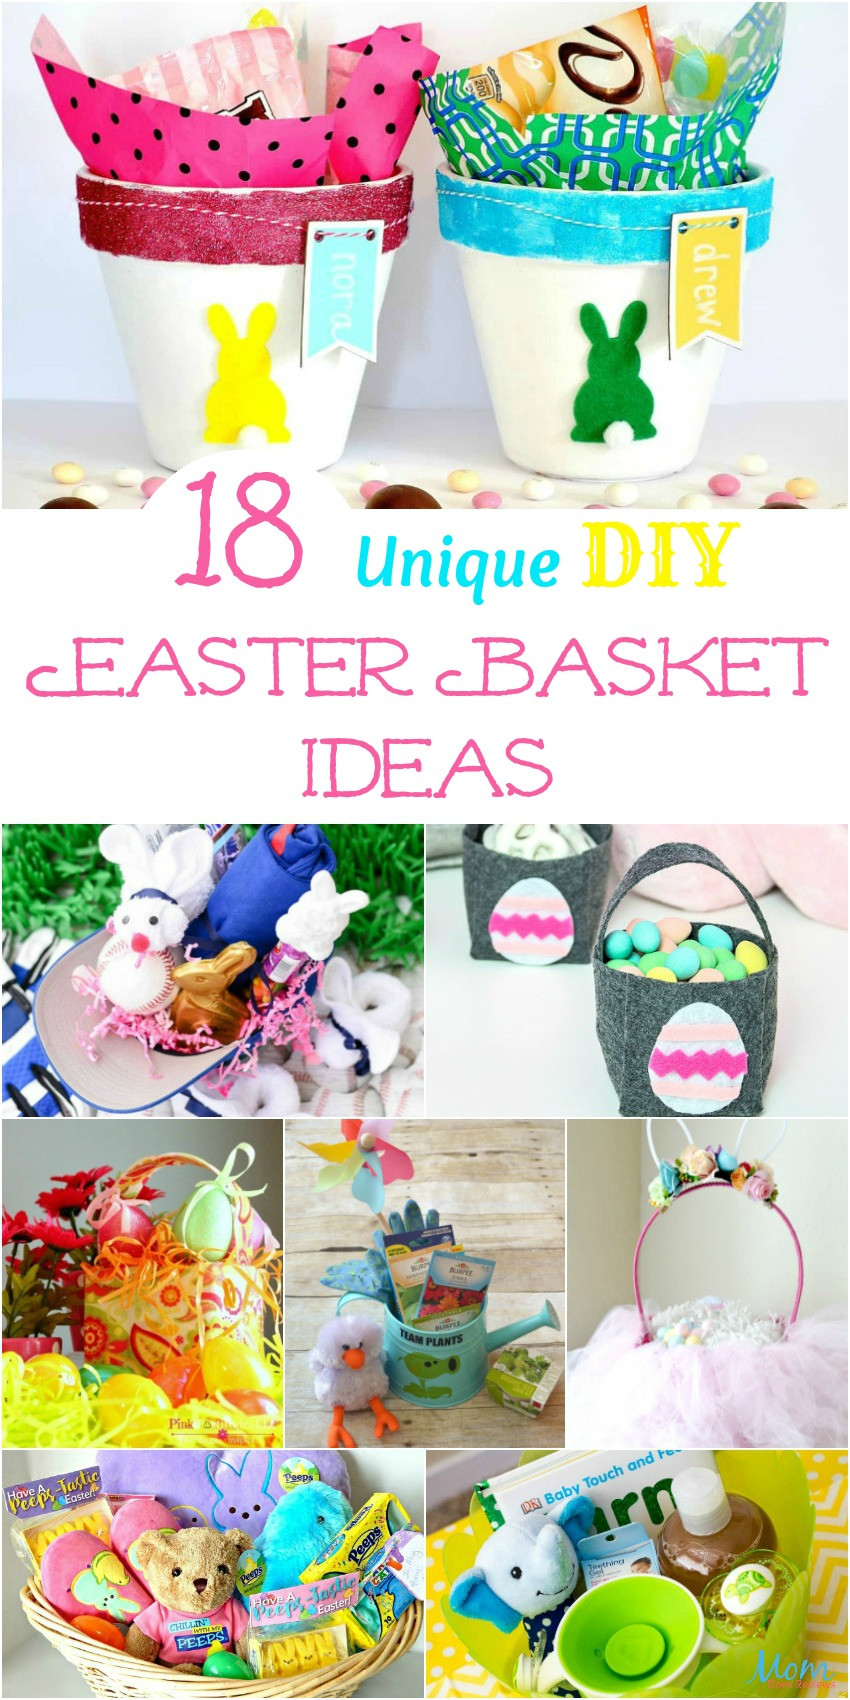 Cute Easter Basket Ideas
 18 Unique DIY Easter Basket Ideas too Cute Not to Try